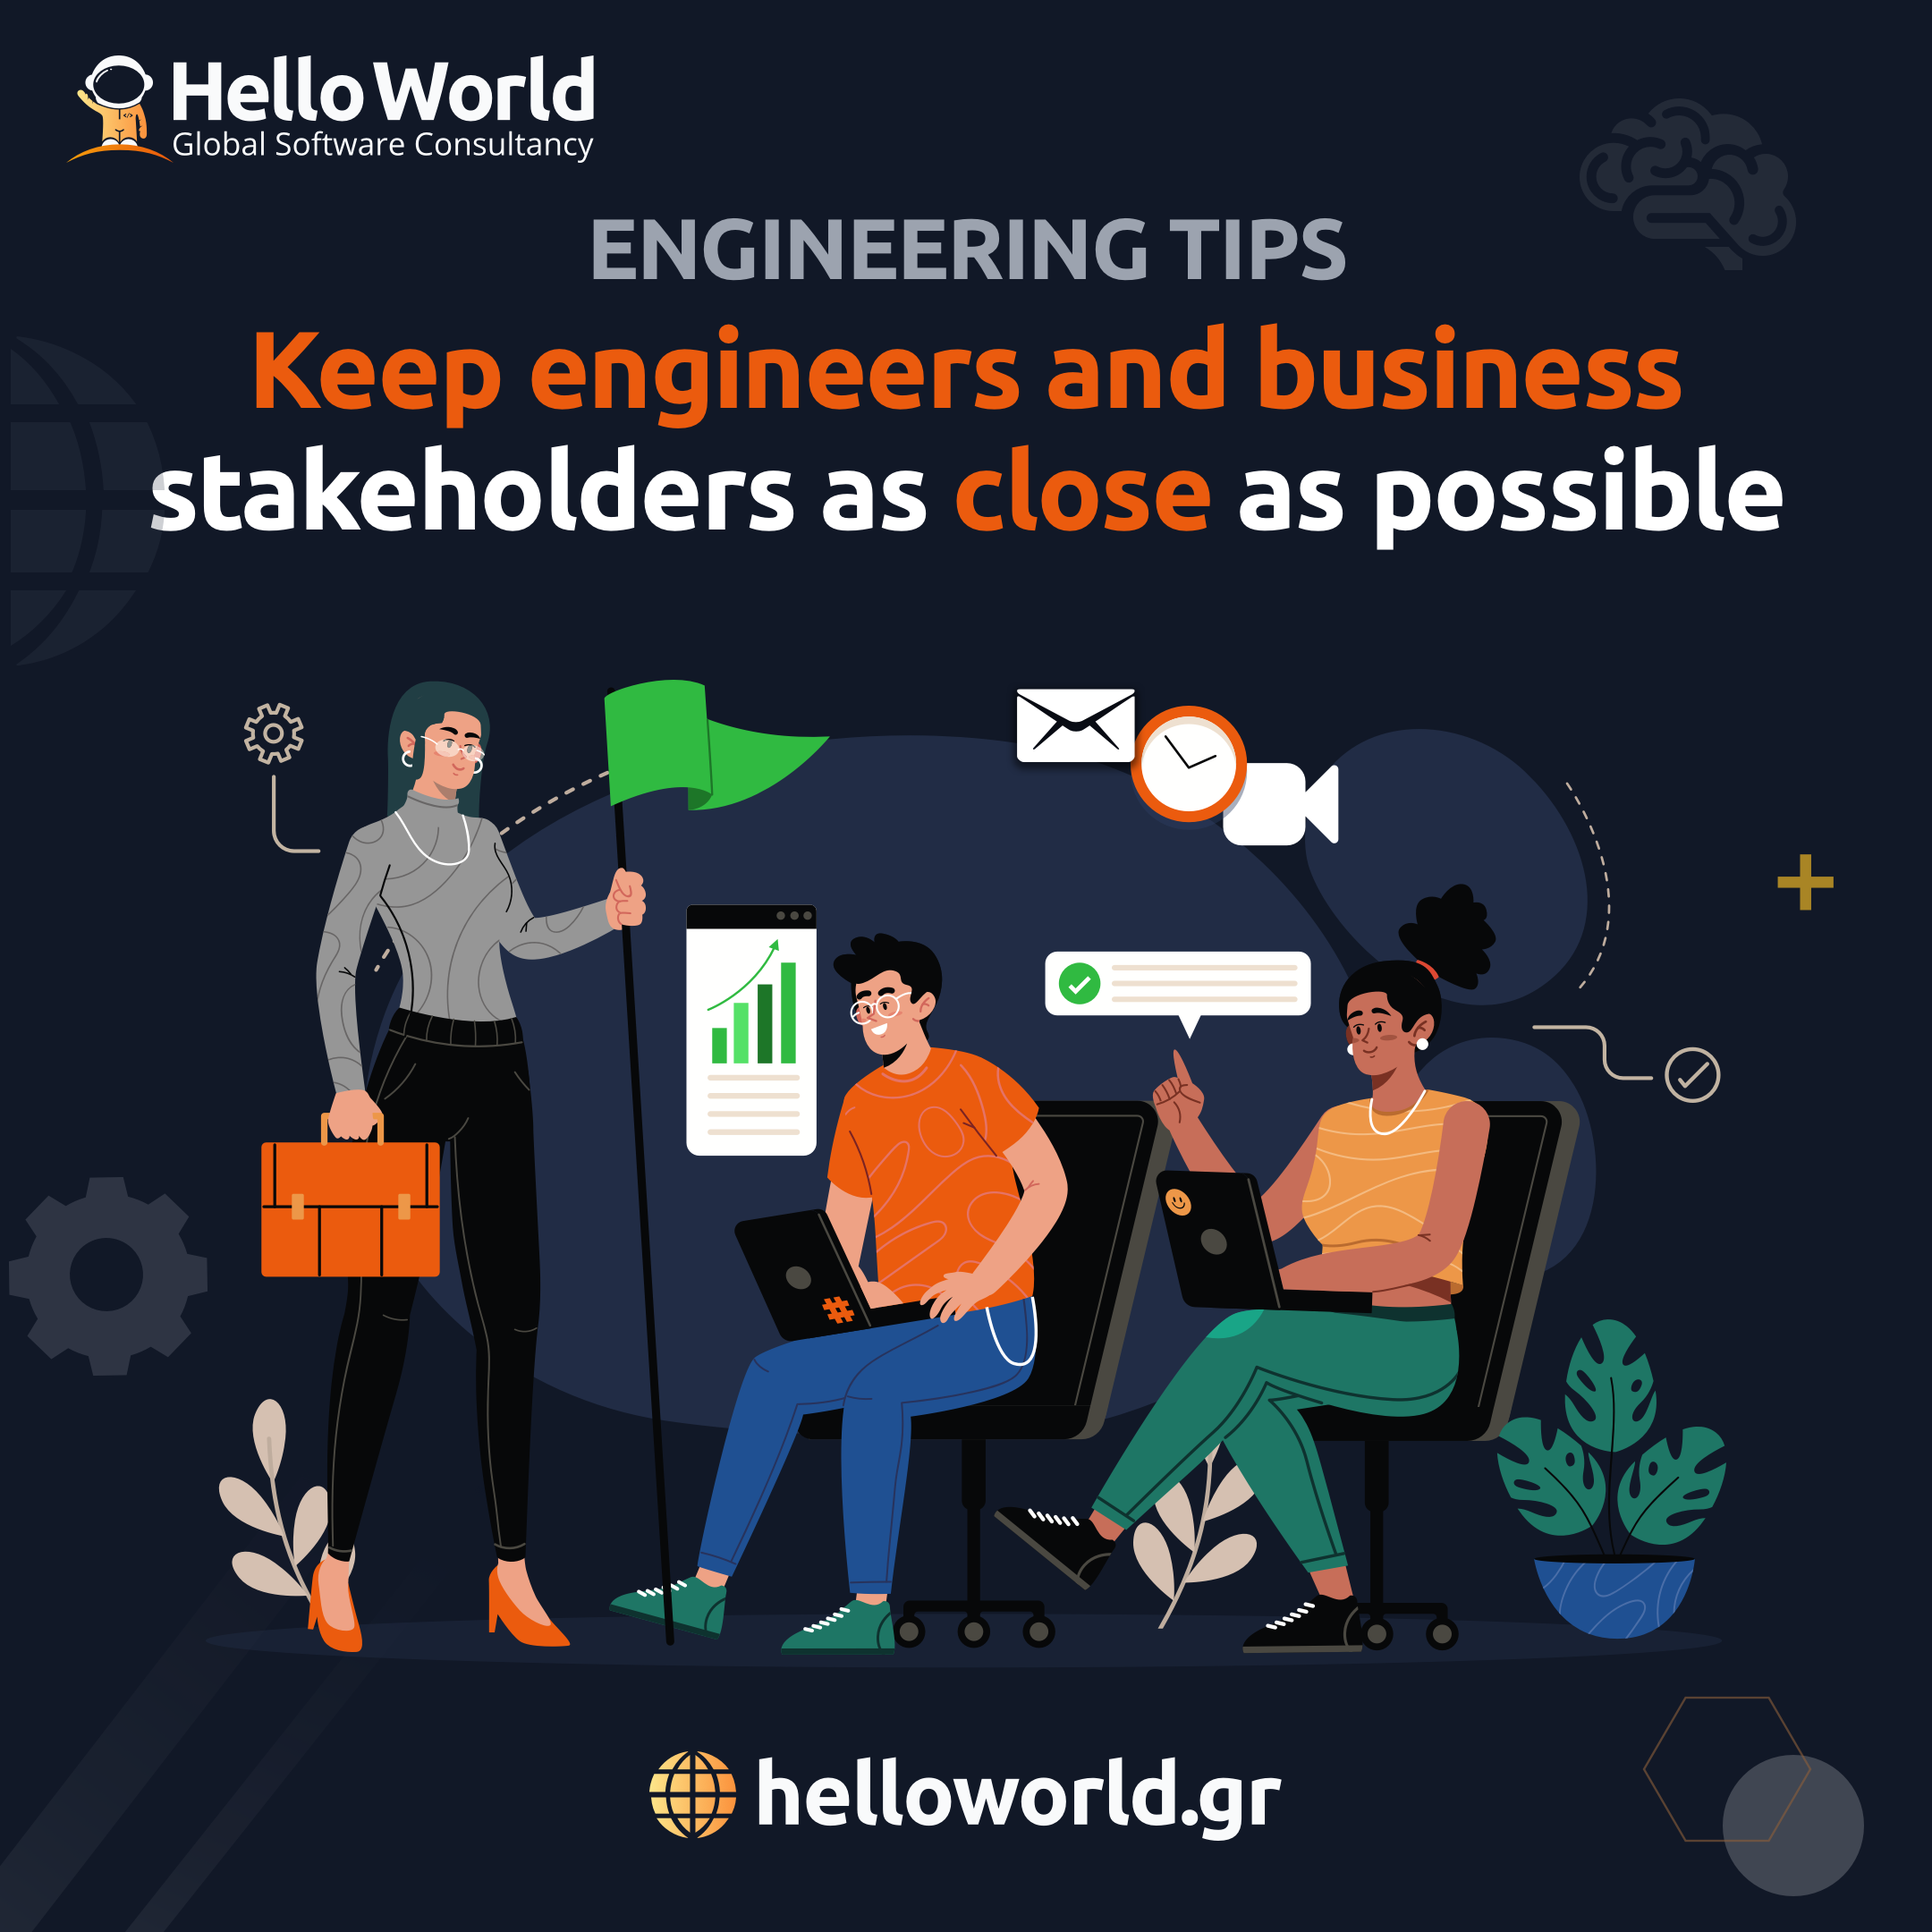 Keep engineers and business stakeholders as close as possible